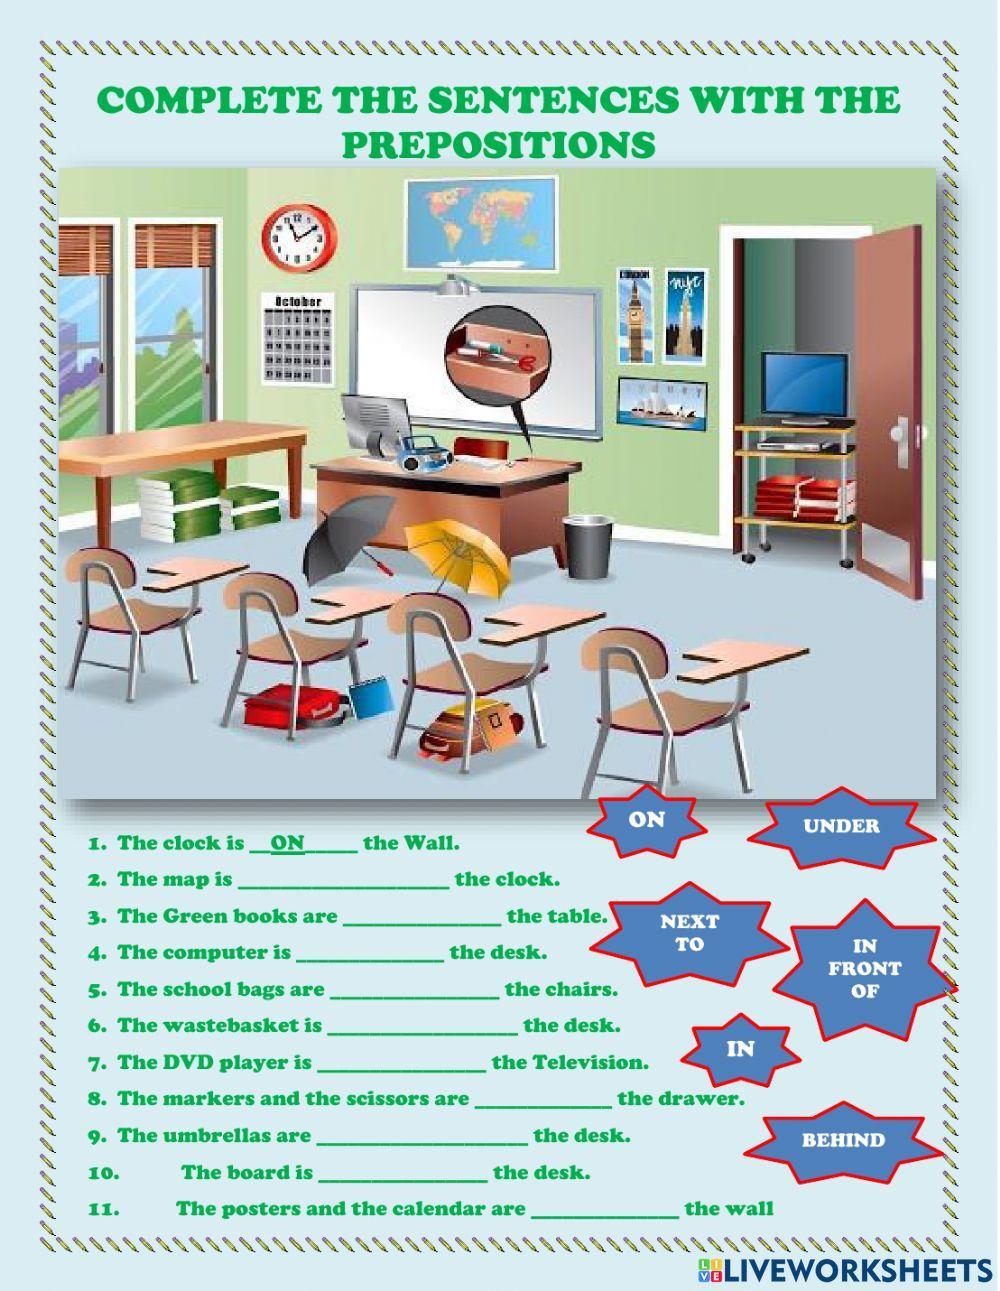 Prepositions of place and classroom objects